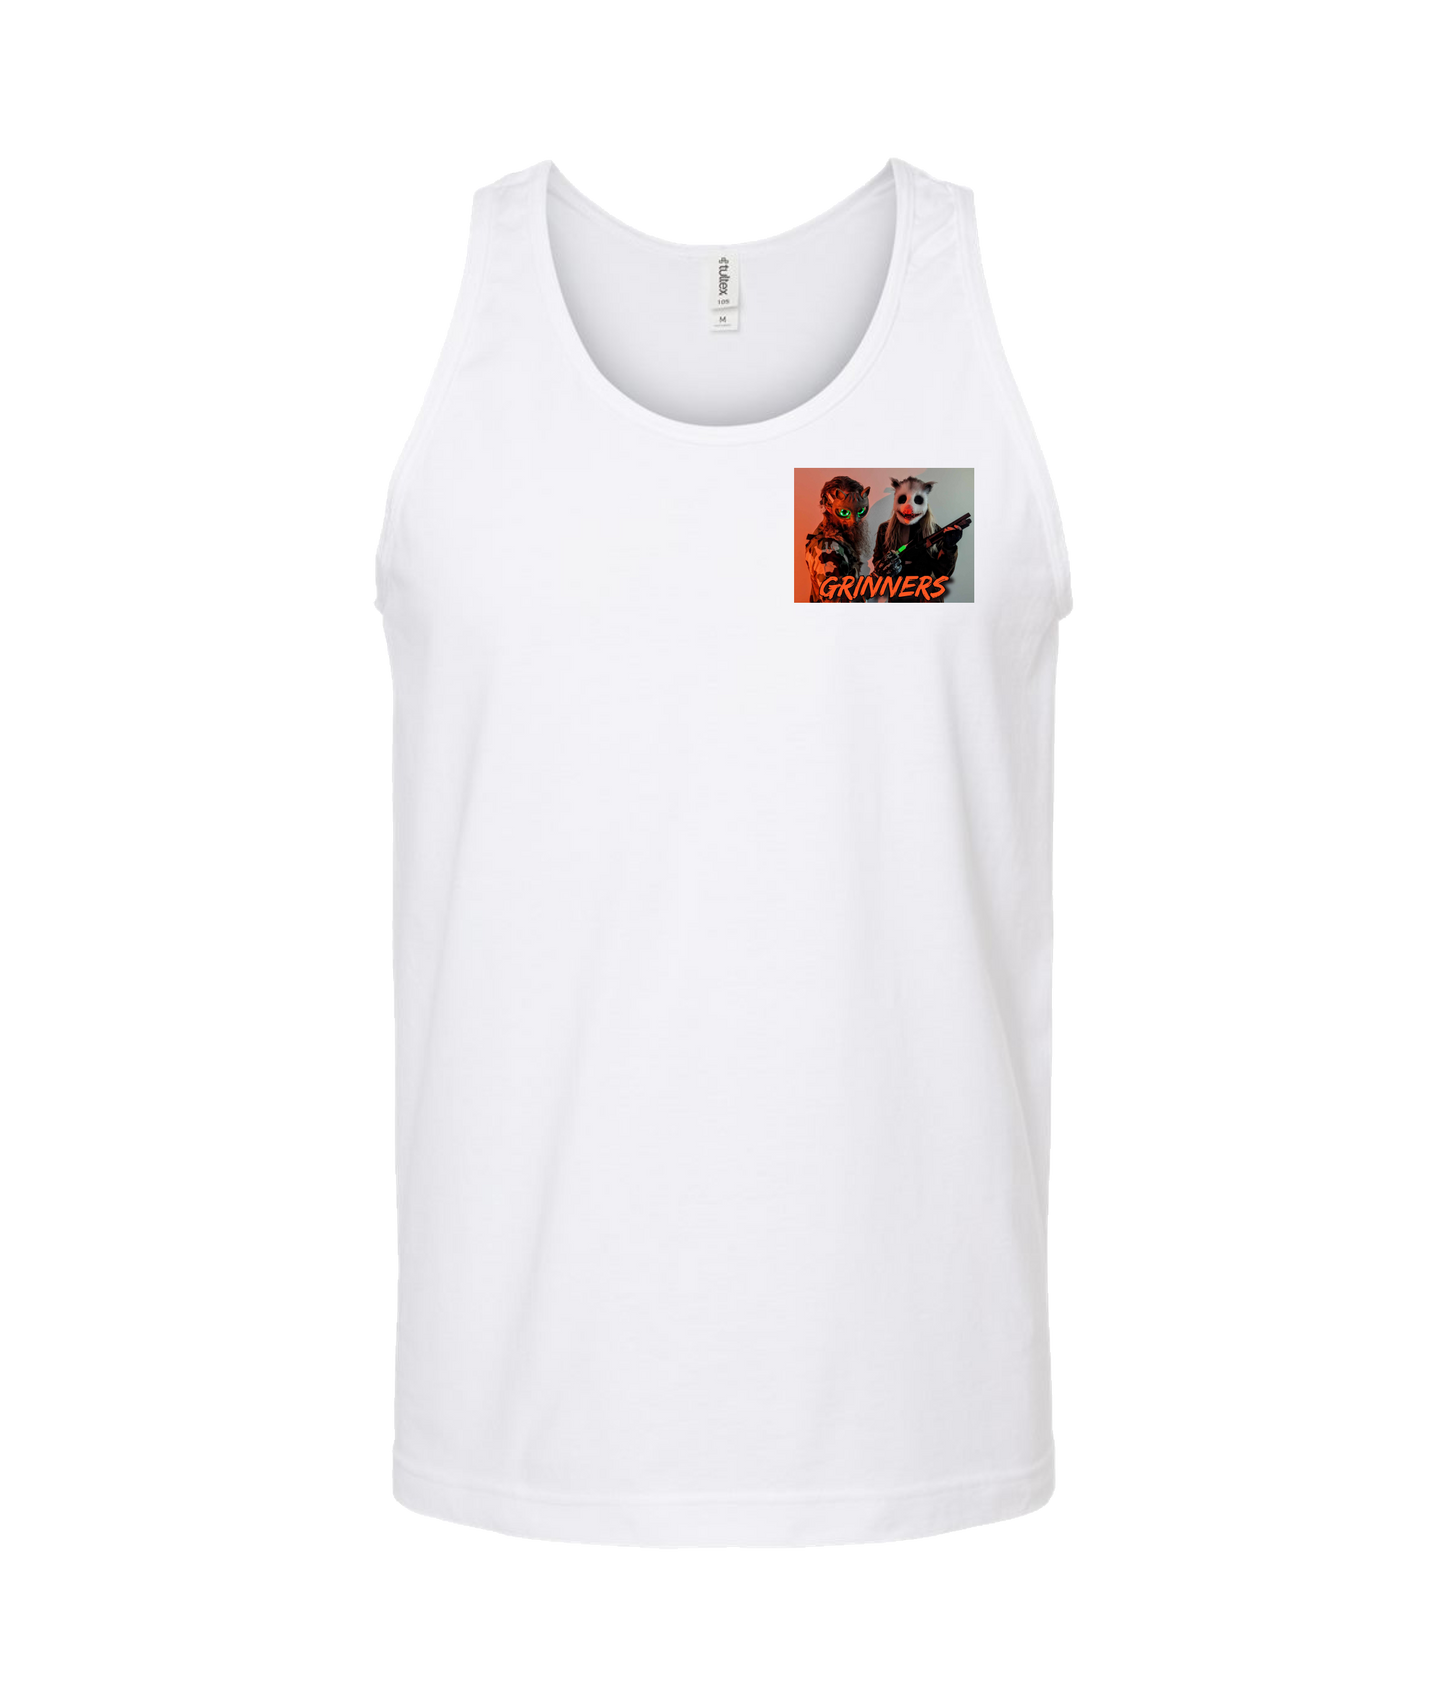 Refinery Films - GRINNERS GARB 01-2 - White Tank Top